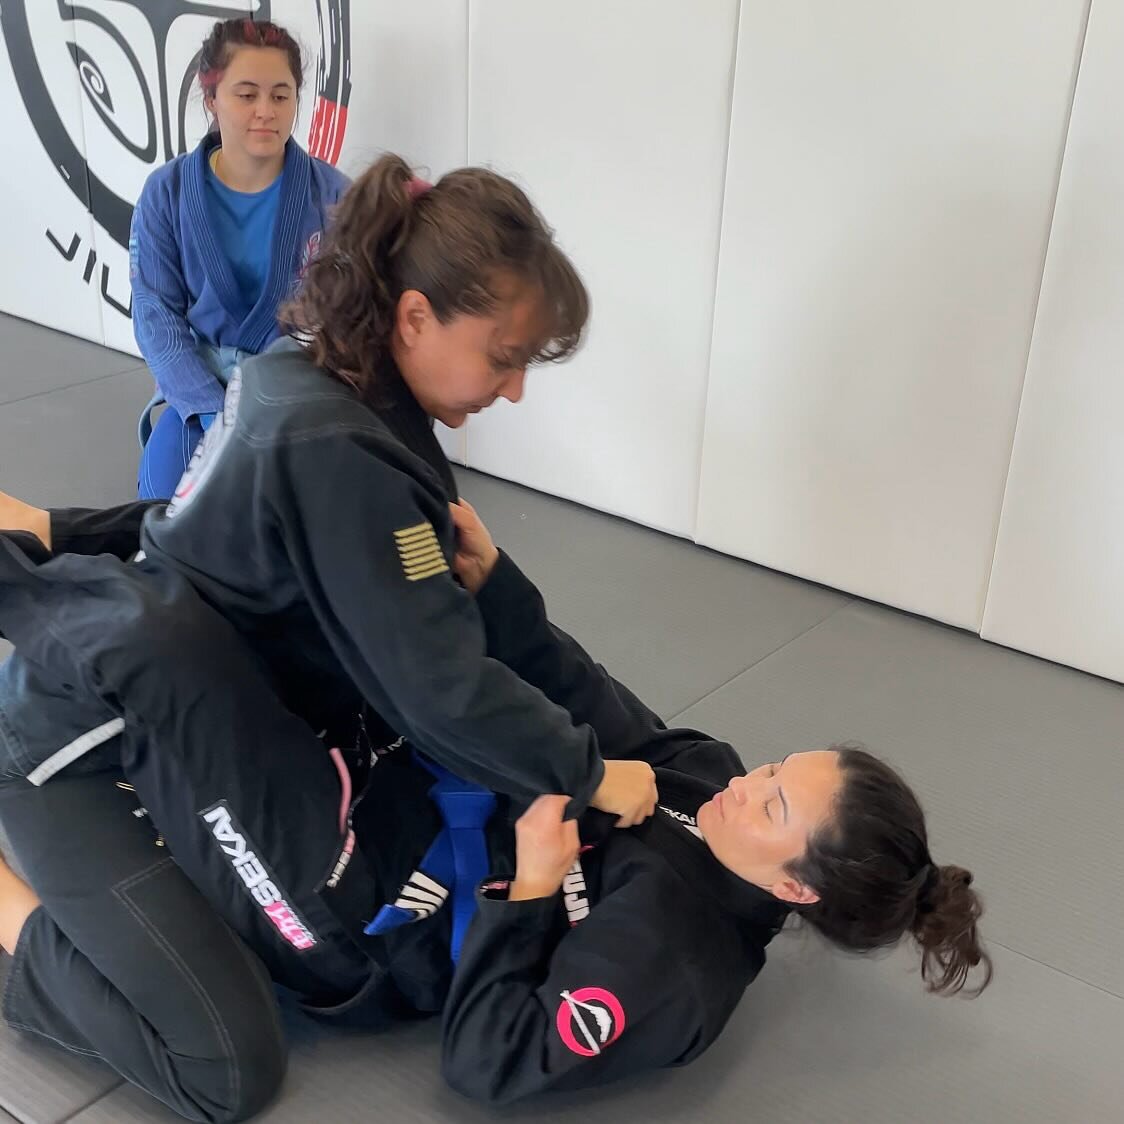 Closed guard in Jiu Jitsu is 🔑! It offers control, defense, offense, versatility, and safety. Mastering it is essential for both self-defense and sport aspects of Jiu Jitsu. 🥋💪 #ClosedGuard #BJJ #MartialArts&rdquo;
.
✅ Check out the classes we off